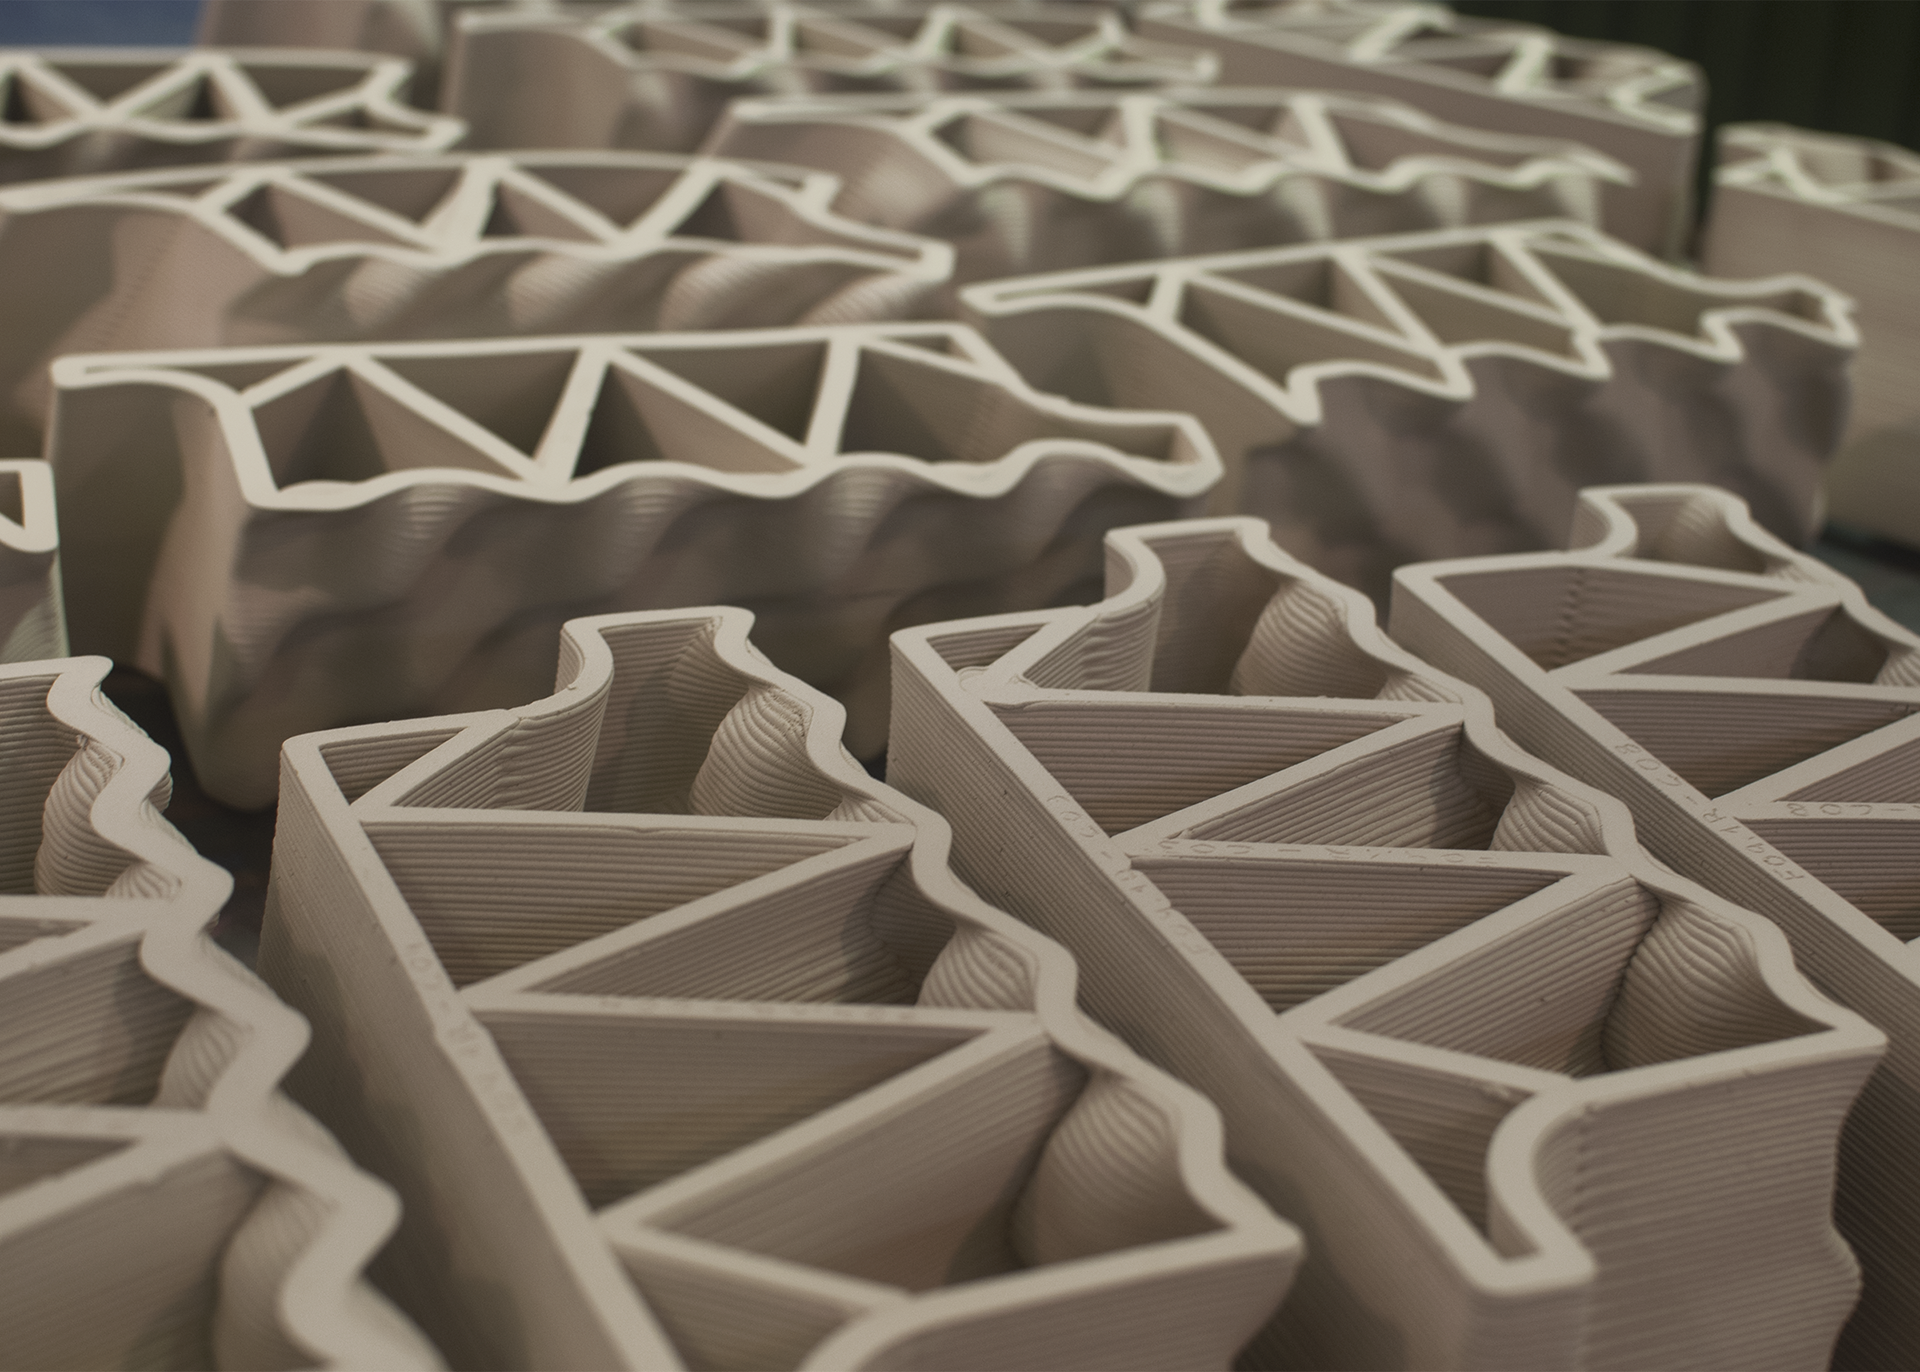 Detailed view of an array of printed bricks